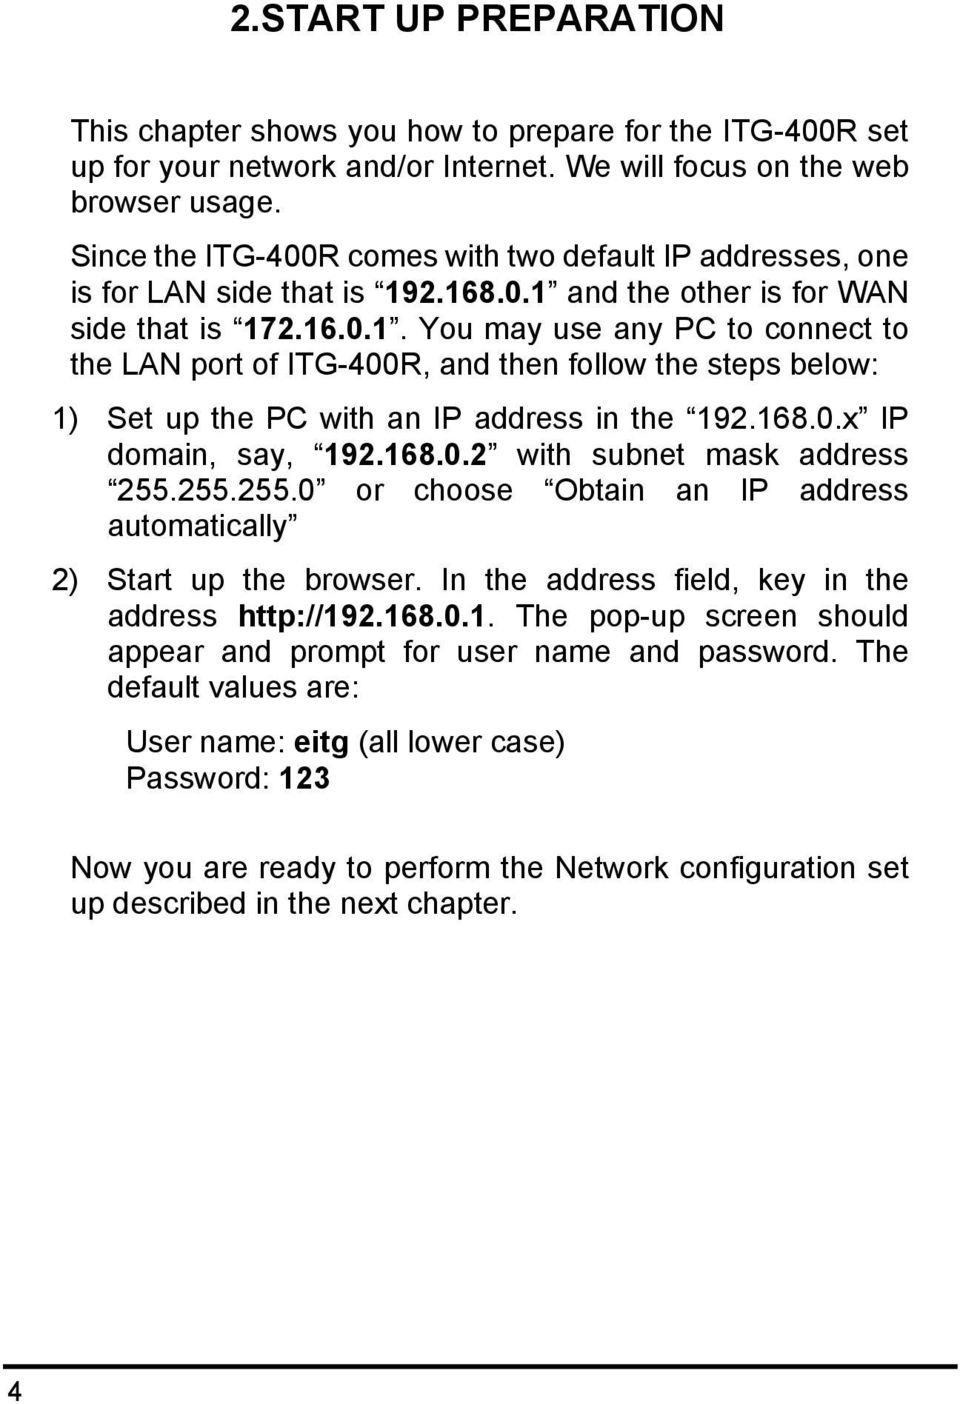 2.168.0.1 and the other is for WAN side that is 172.16.0.1. You may use any PC to connect to the LAN port of ITG-400R, and then follow the steps below: 1) Set up the PC with an IP address in the 192.